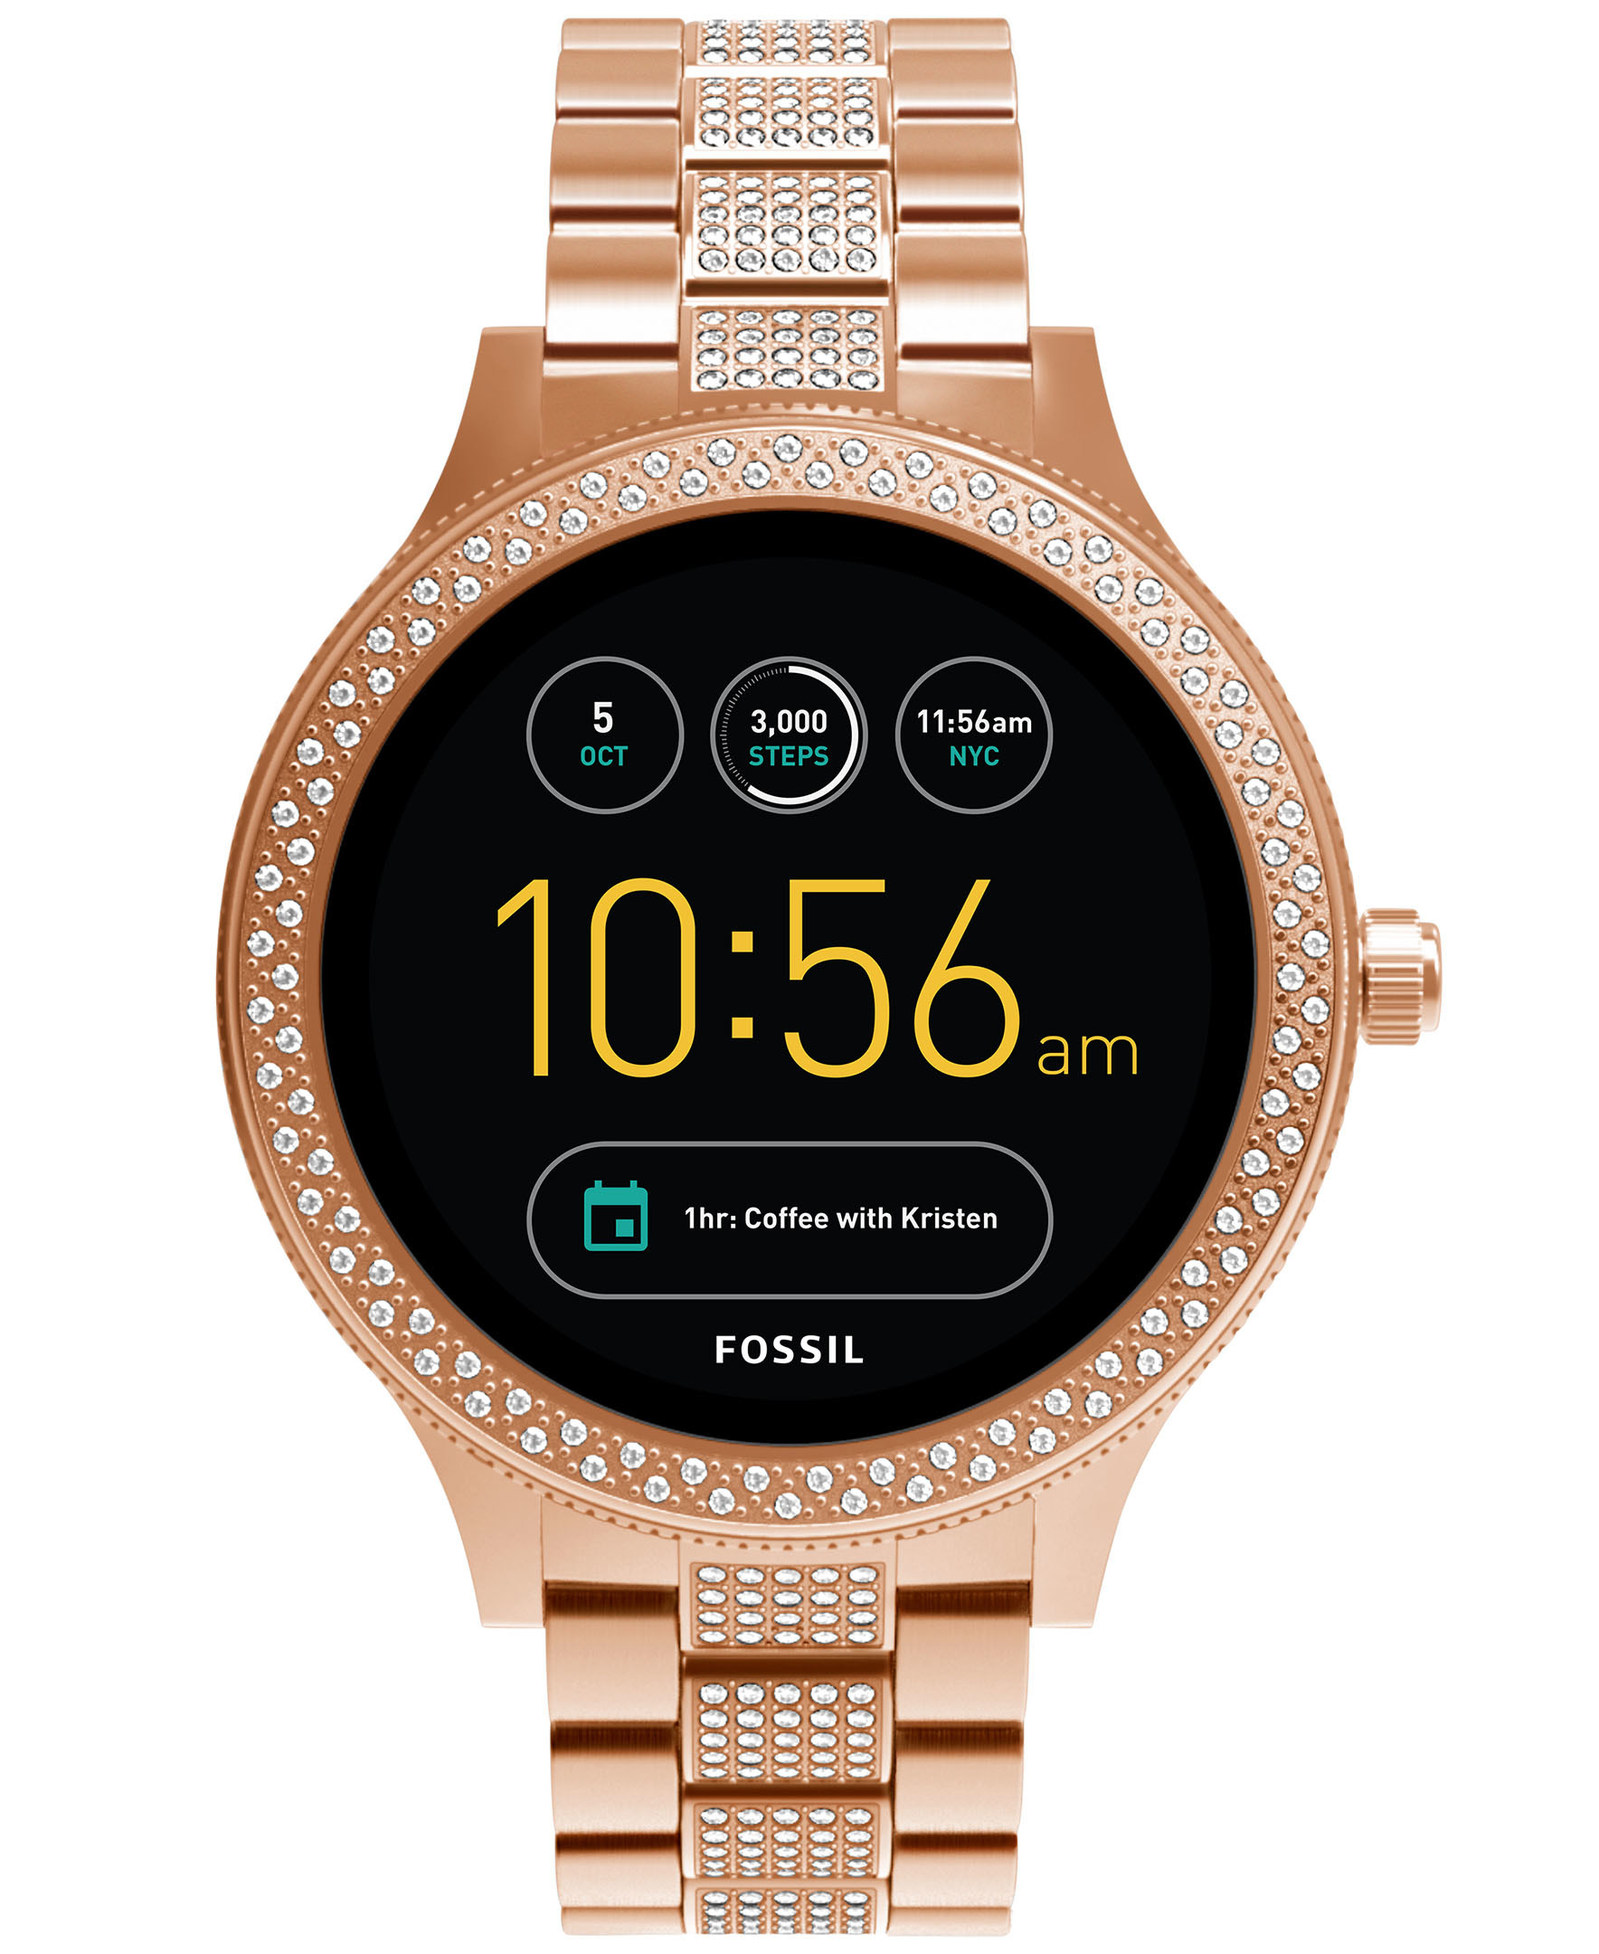 Fossil-IFA-2017-Watches-03